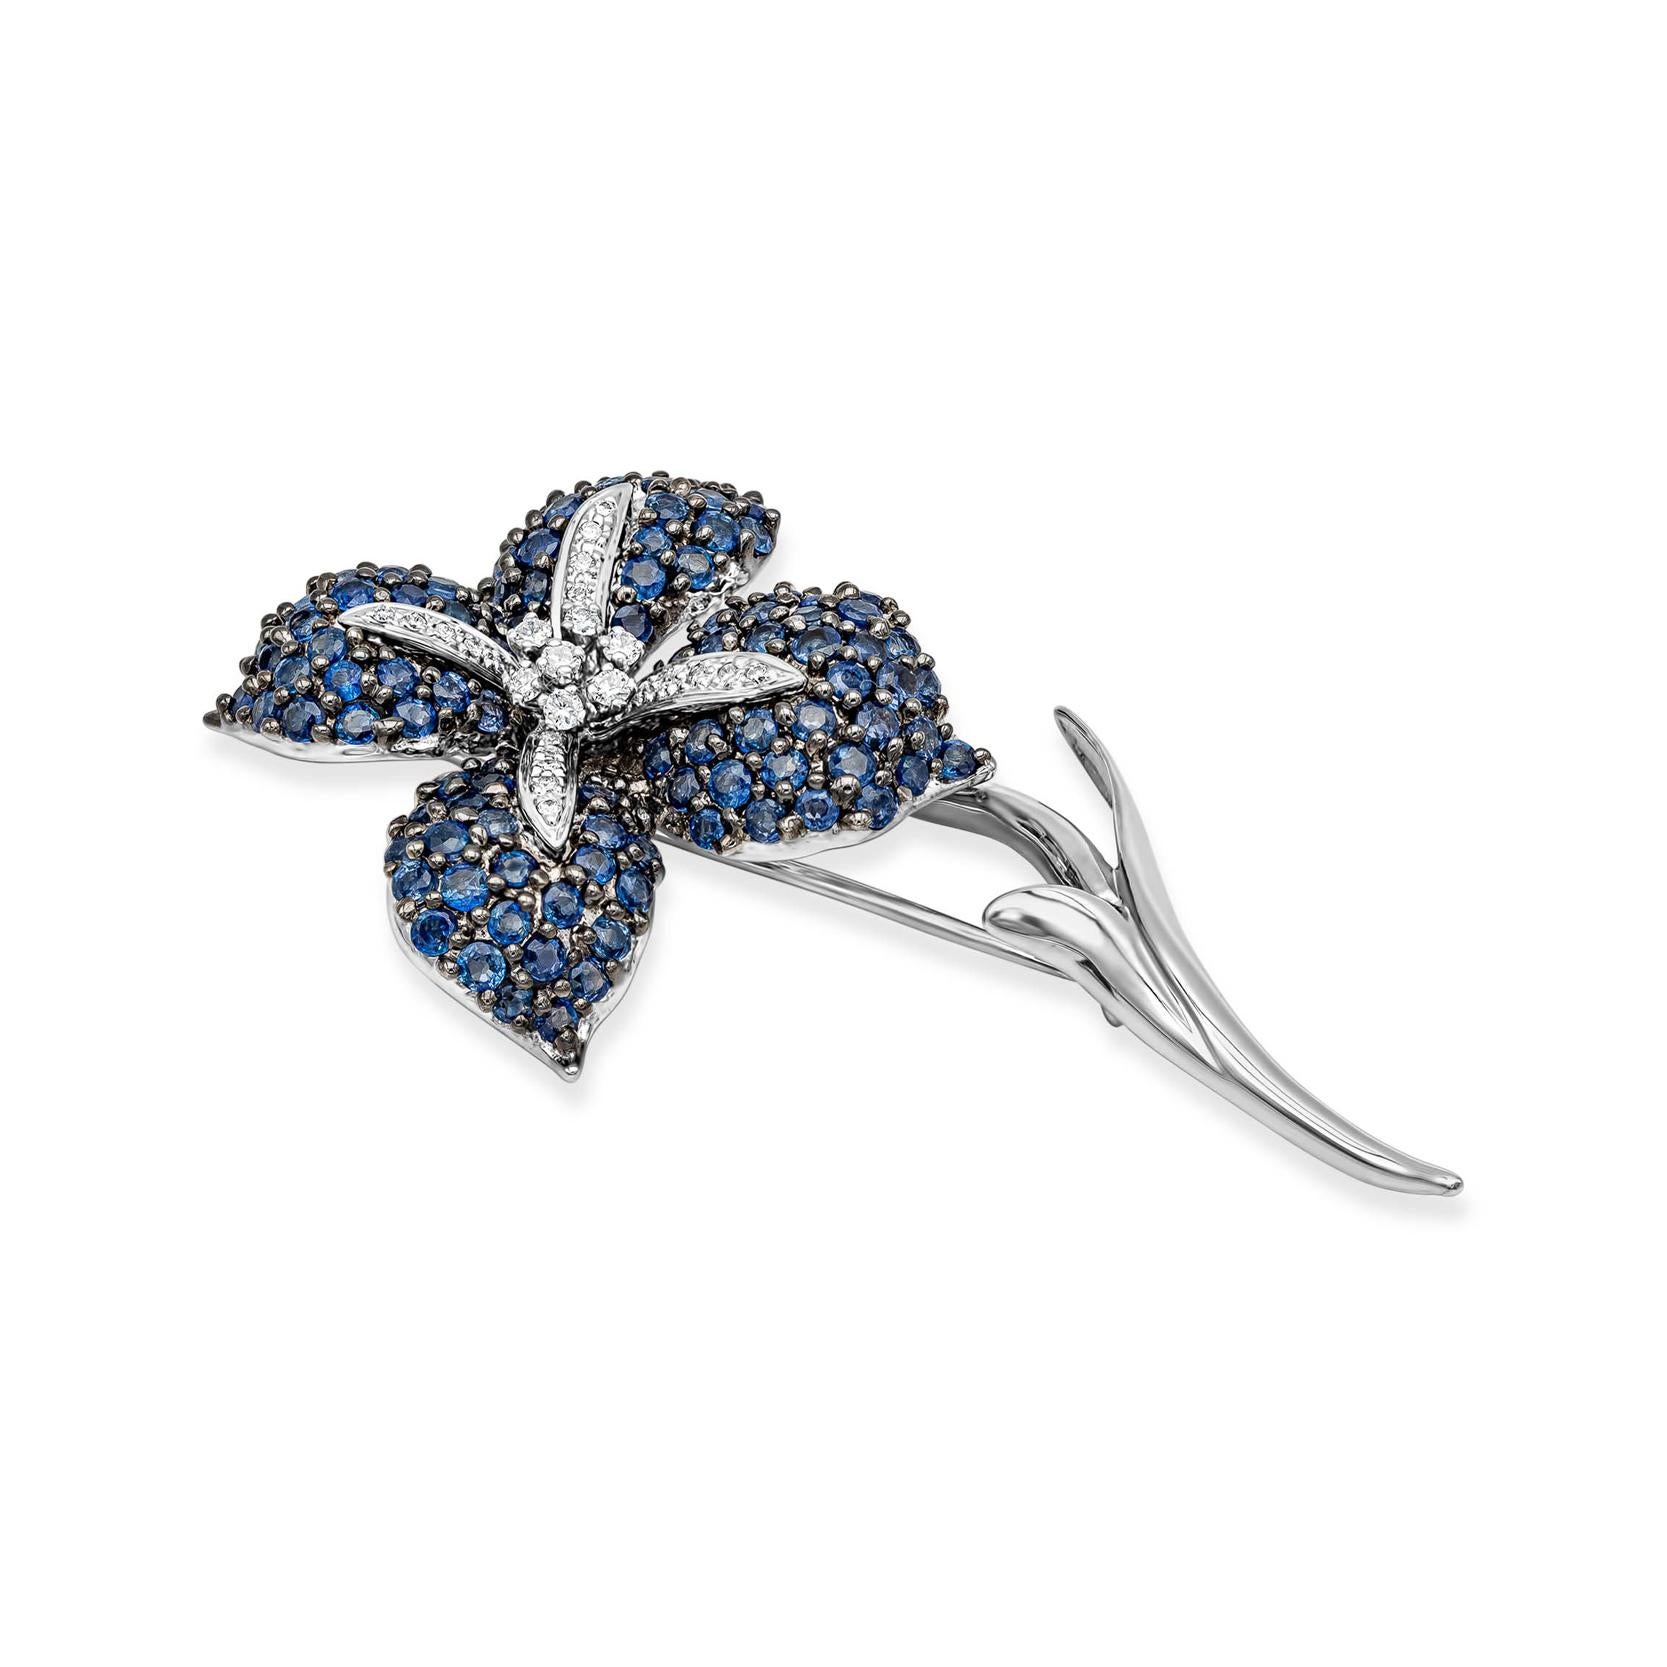 A beautiful pin showcasing 5.54 carats of blue sapphires and 0.36 carats of diamonds, set in a four petal flower design made in 18k white gold. 